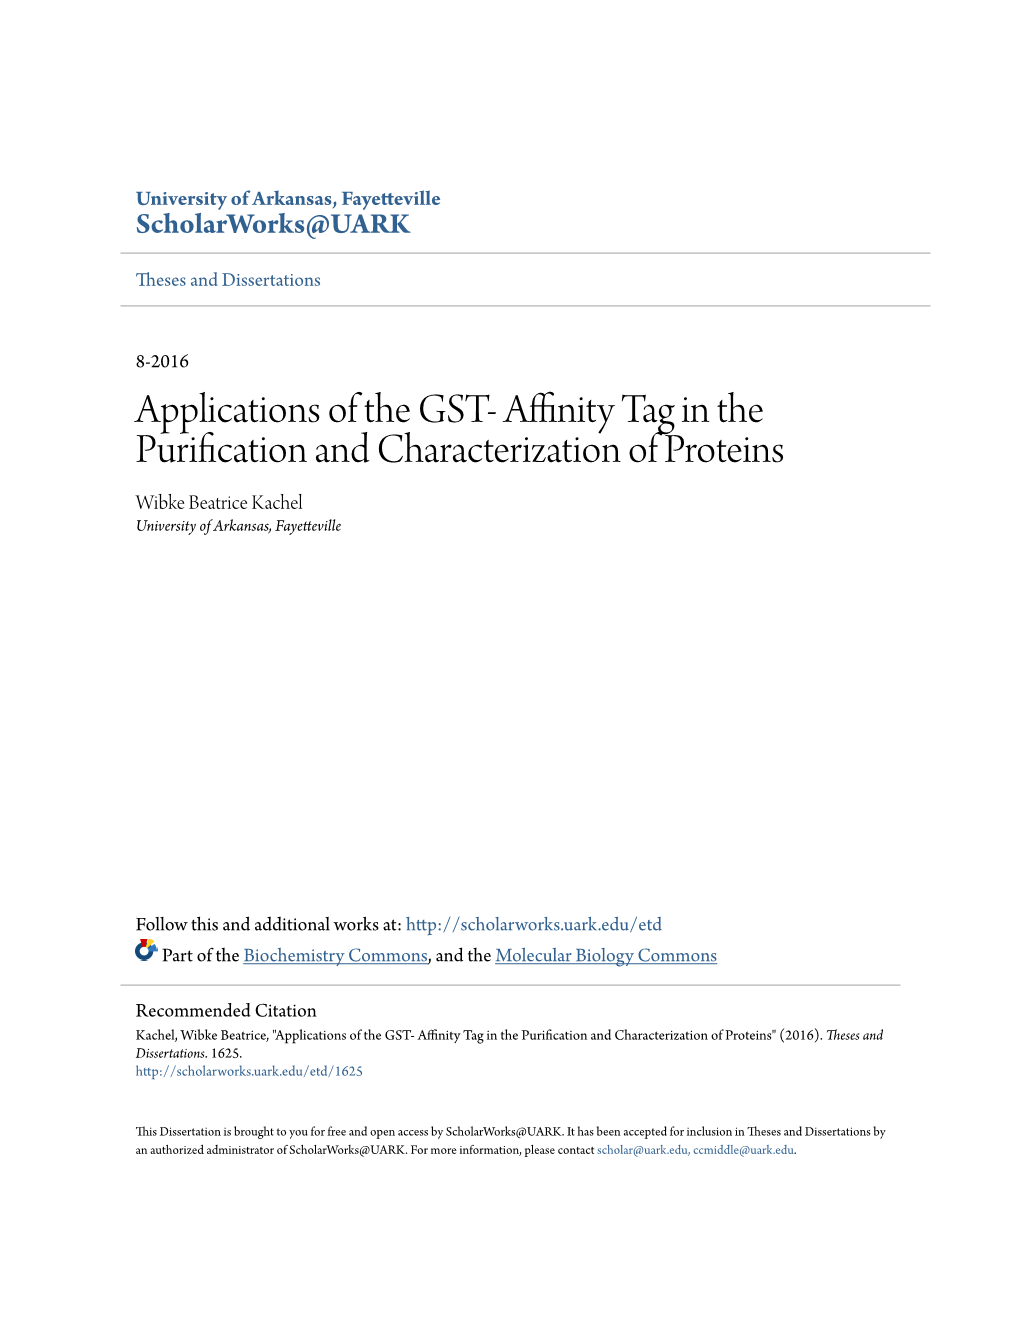 Applications of the GST- Affinity Tag in the Purification and Characterization of Proteins Wibke Beatrice Kachel University of Arkansas, Fayetteville